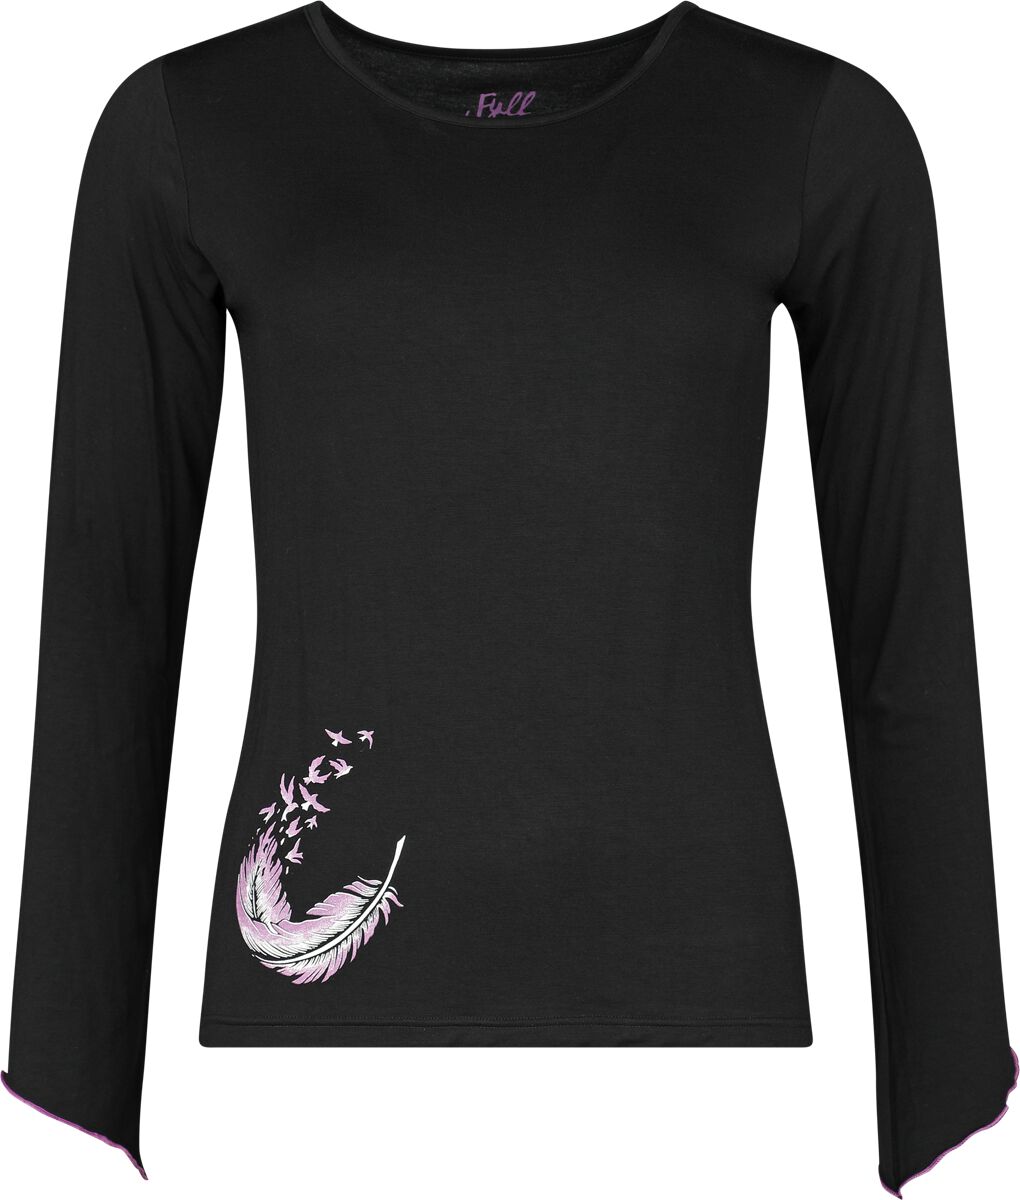 Image of Maglia Maniche Lunghe Gothic di Full Volume by EMP - Longsleeve With Wing And Feather Print - S a XXL - Donna - nero